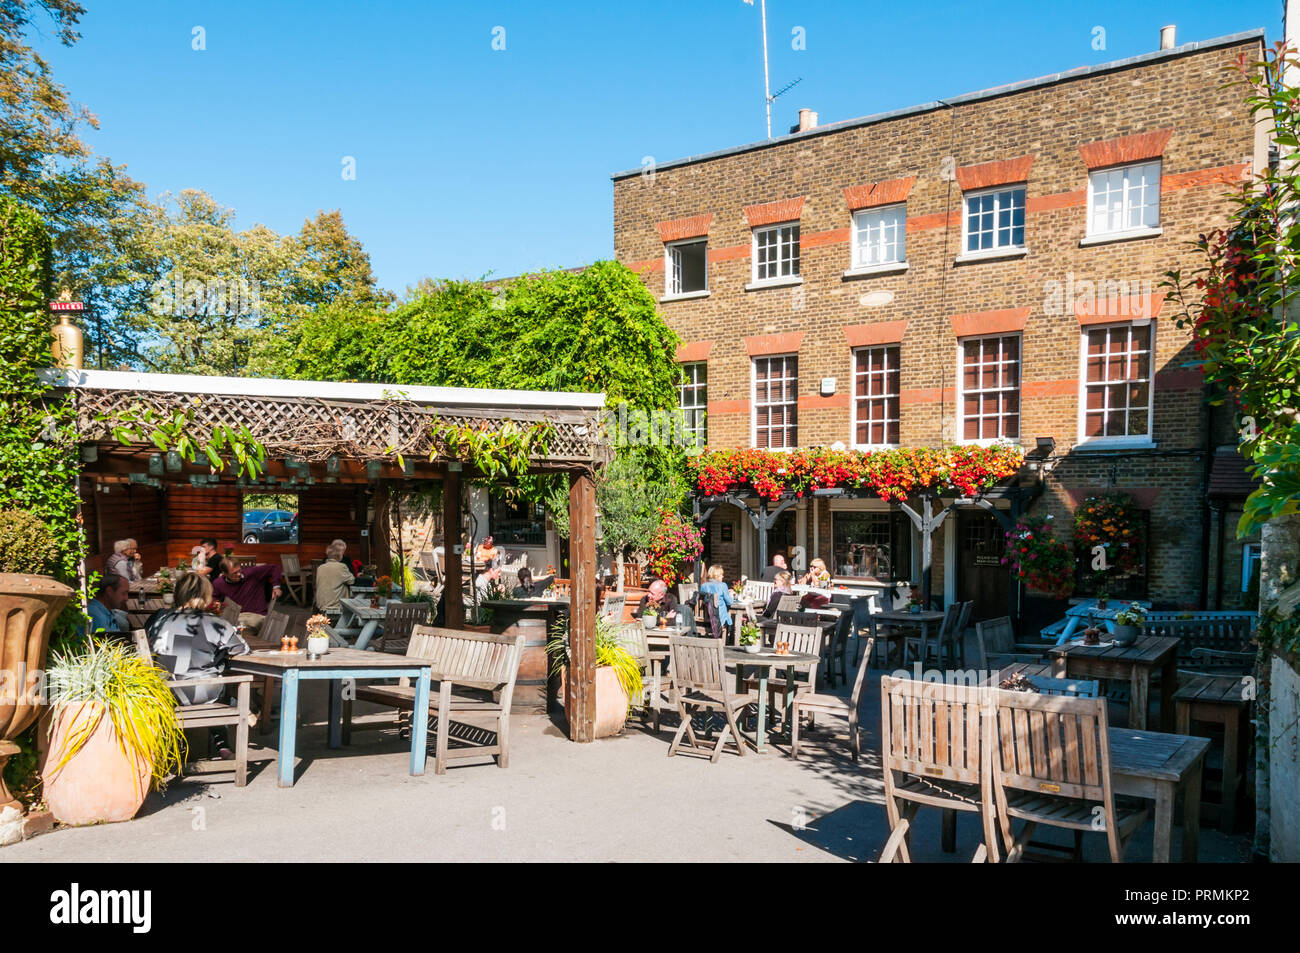 People drinking outside the Flask public house on a sunny day in Highgate, North London. Stock Photo